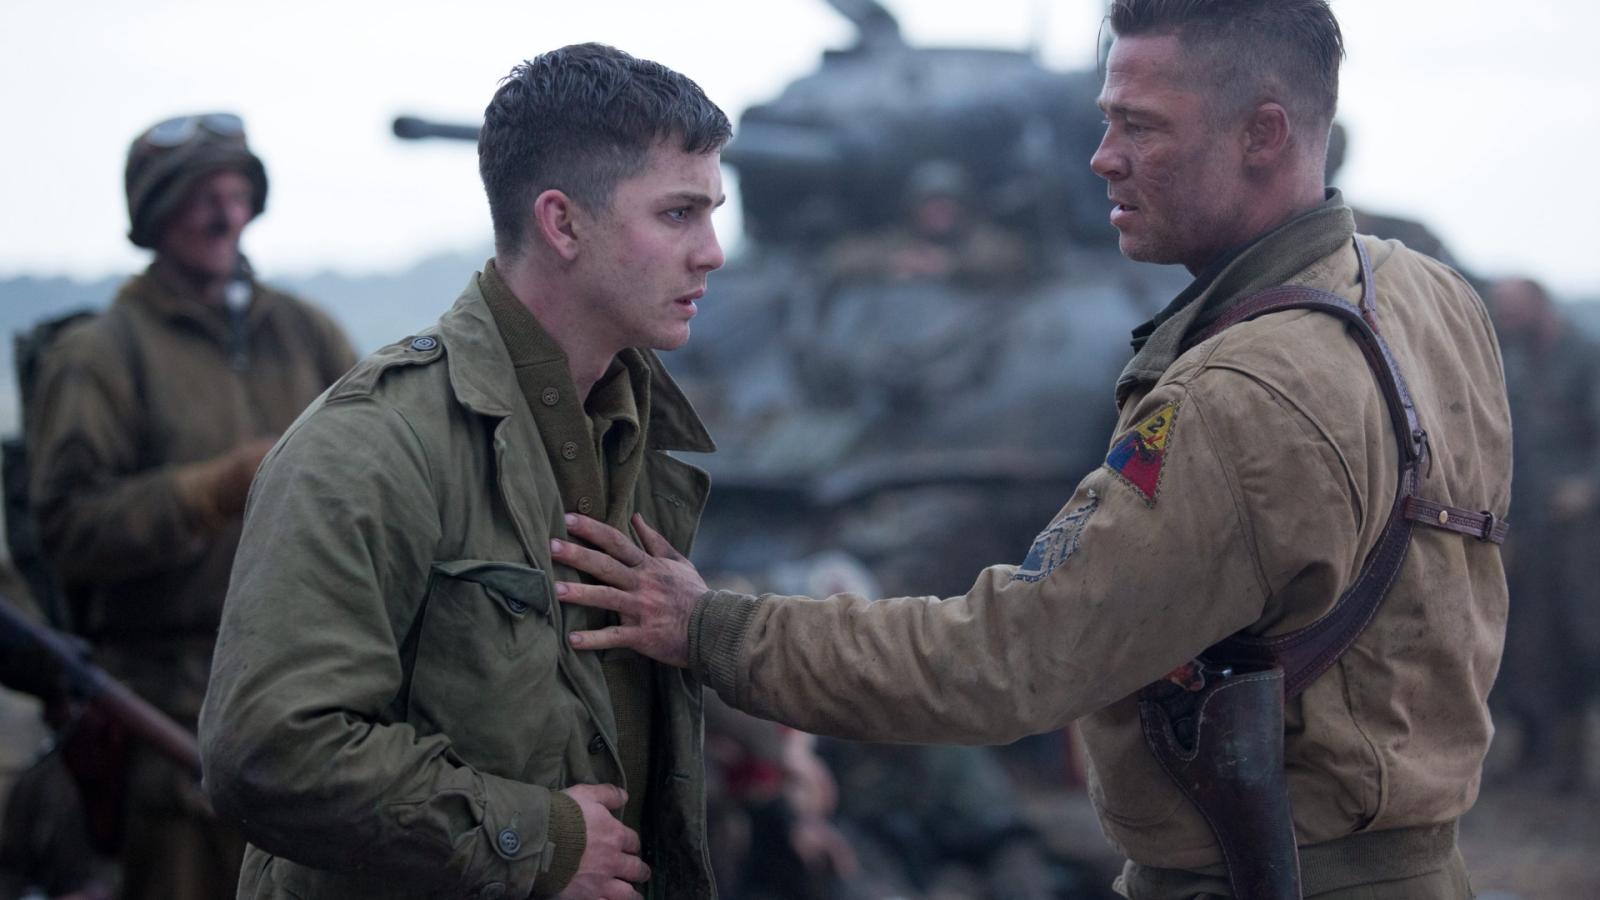 15 War Films with Storylines as Powerful as Saving Private Ryan - image 7